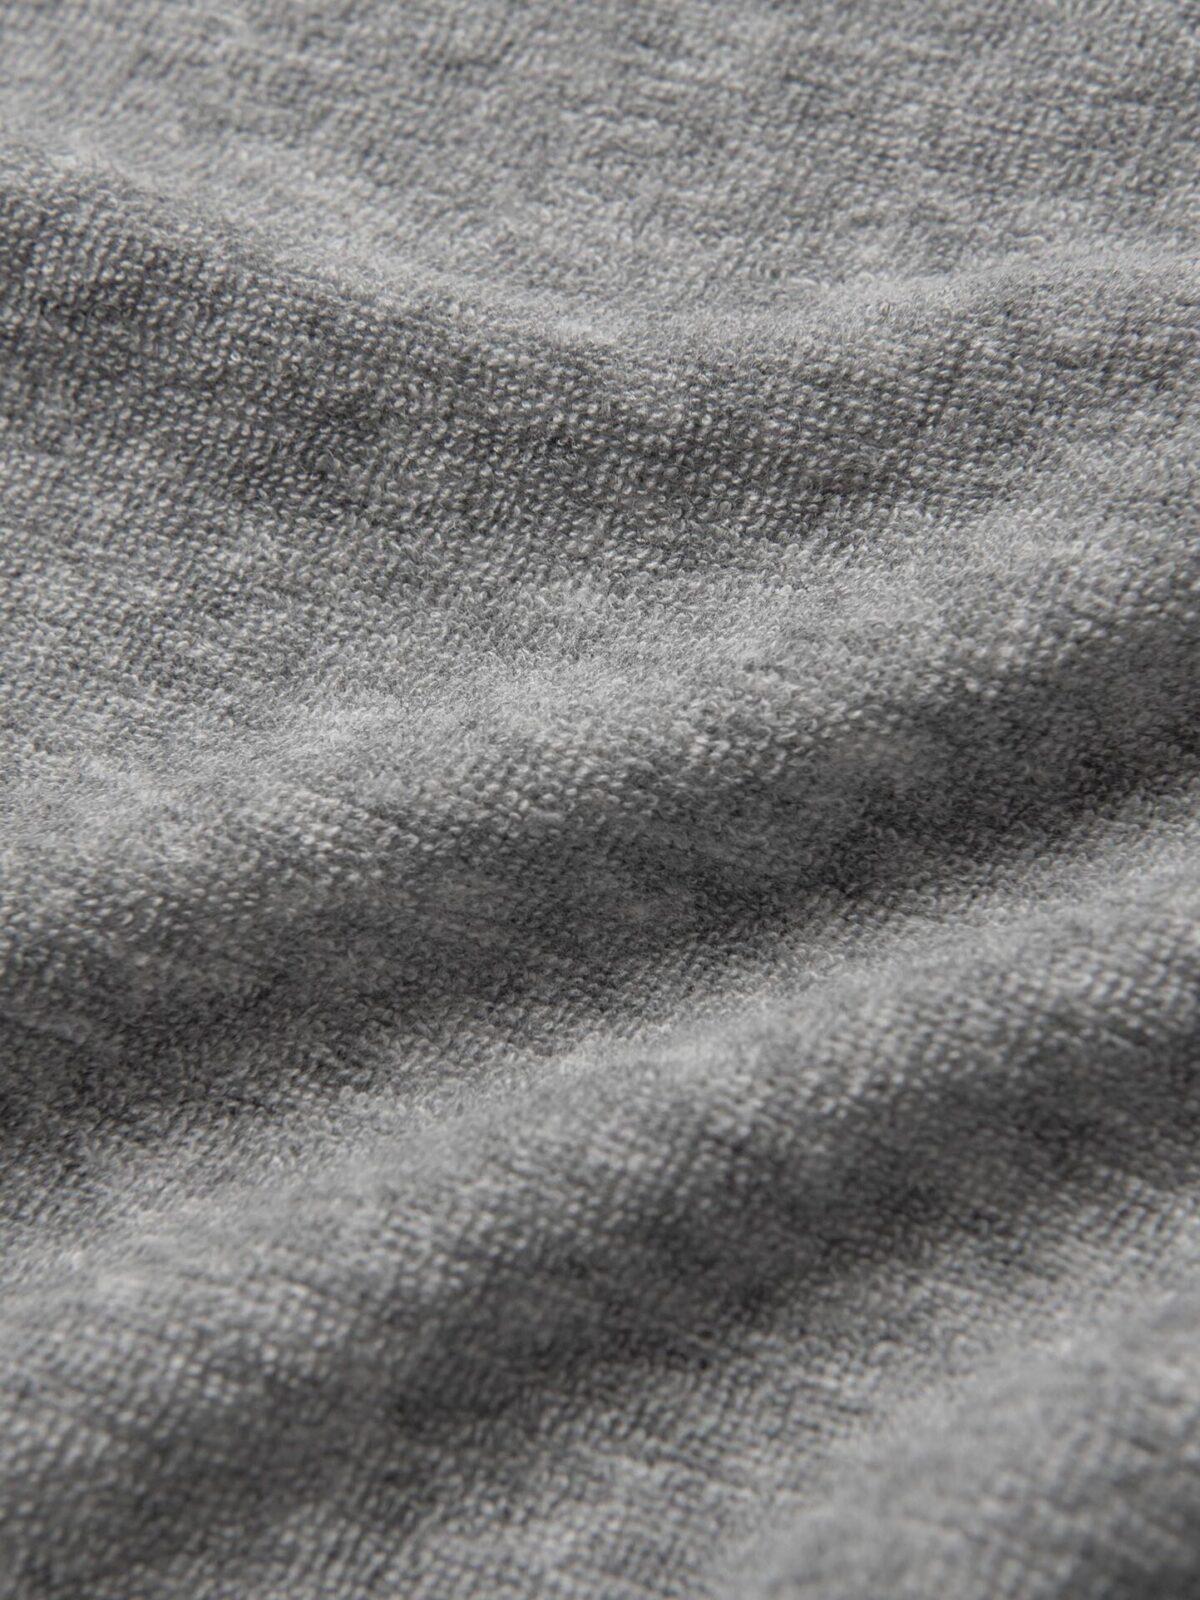 Japanese Grey Melange Terry Cloth Knit Shirts by Proper Cloth